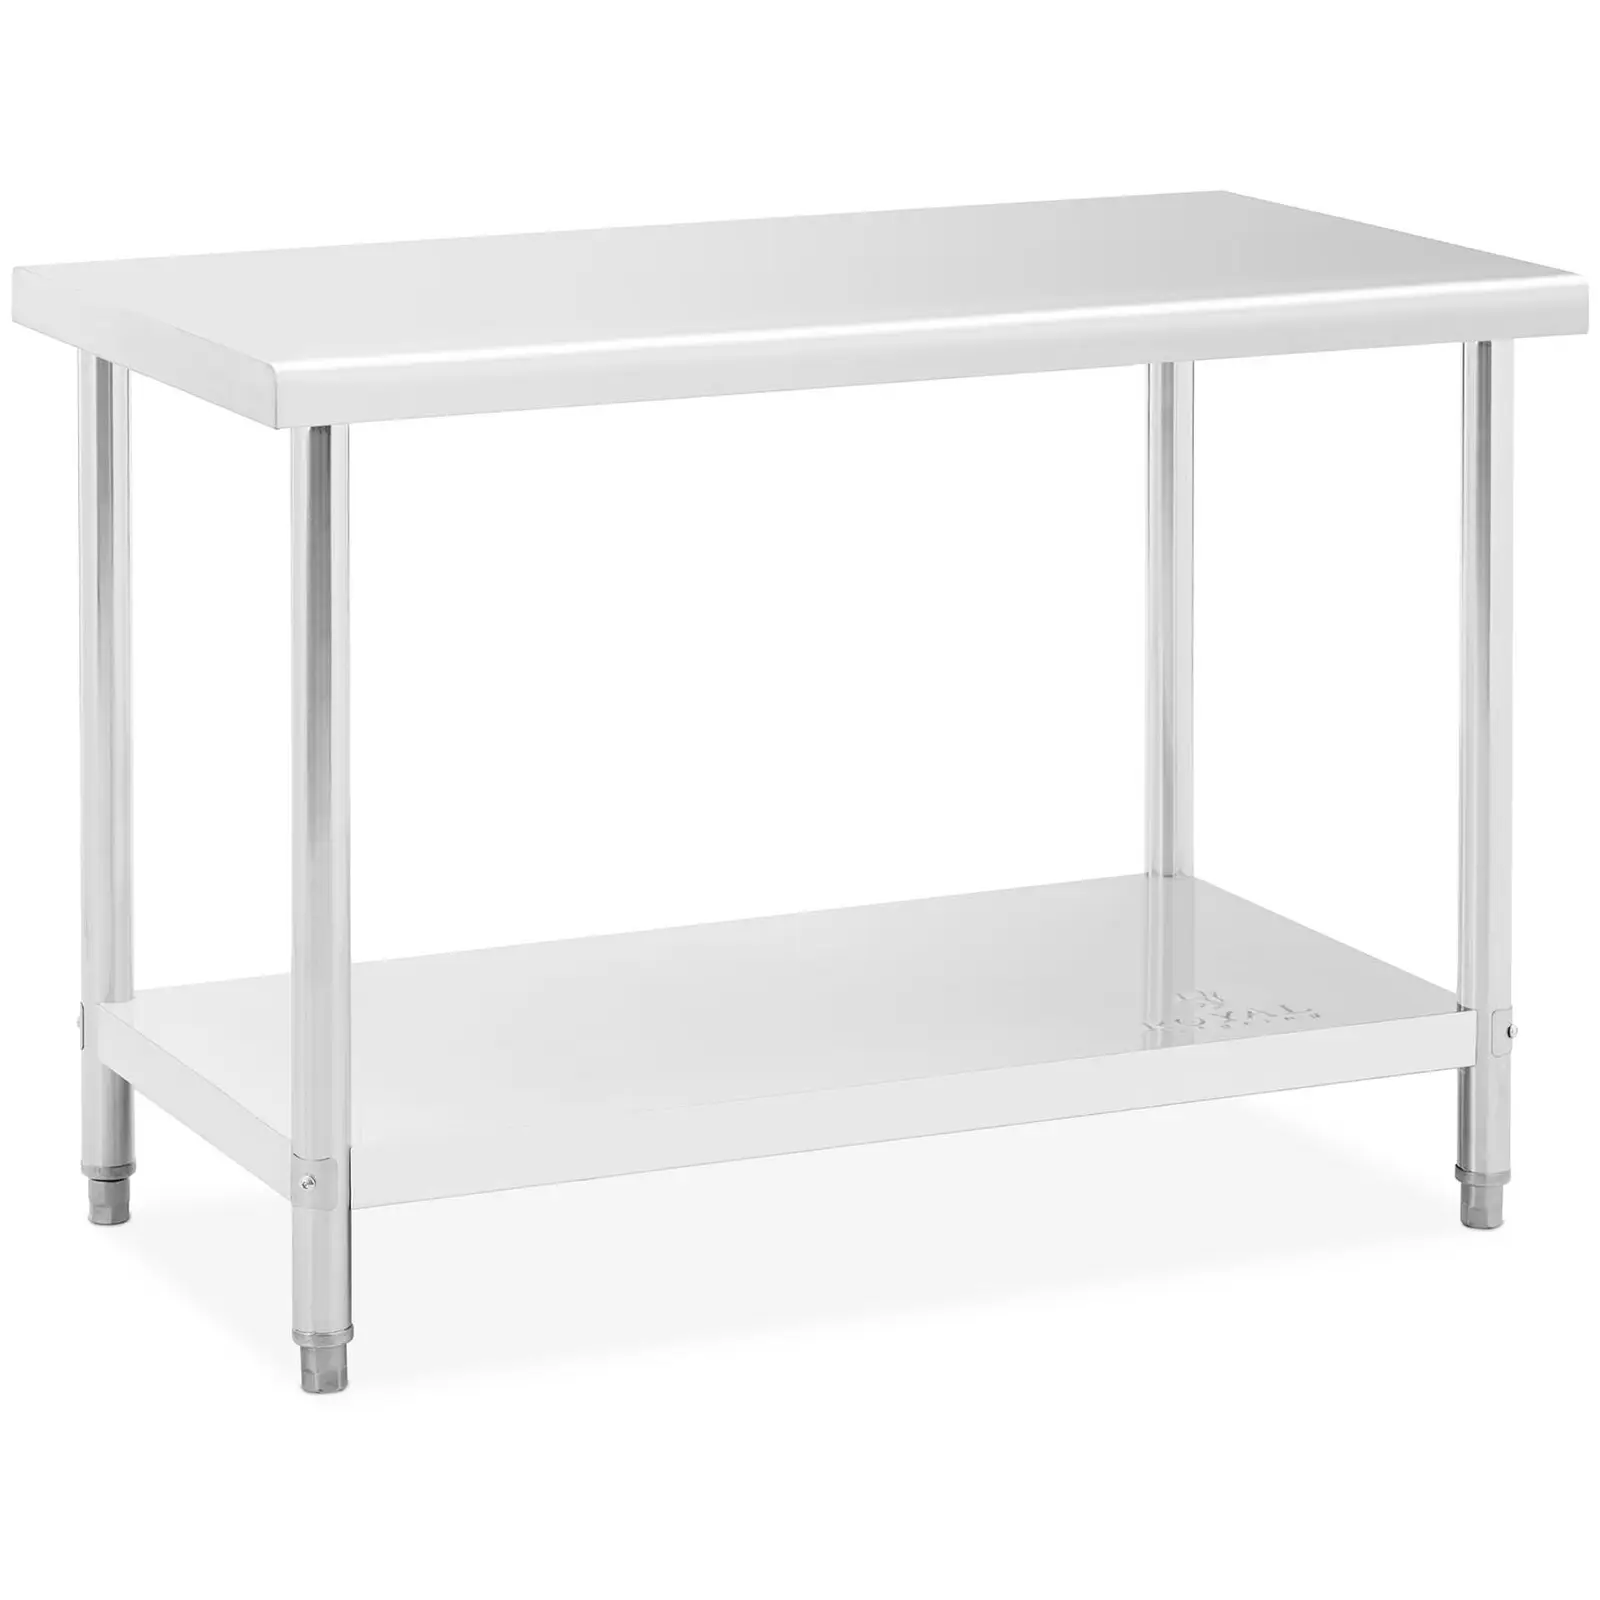 Stainless Steel Table - 120 x 60 cm - max. weight capacity 110 kg